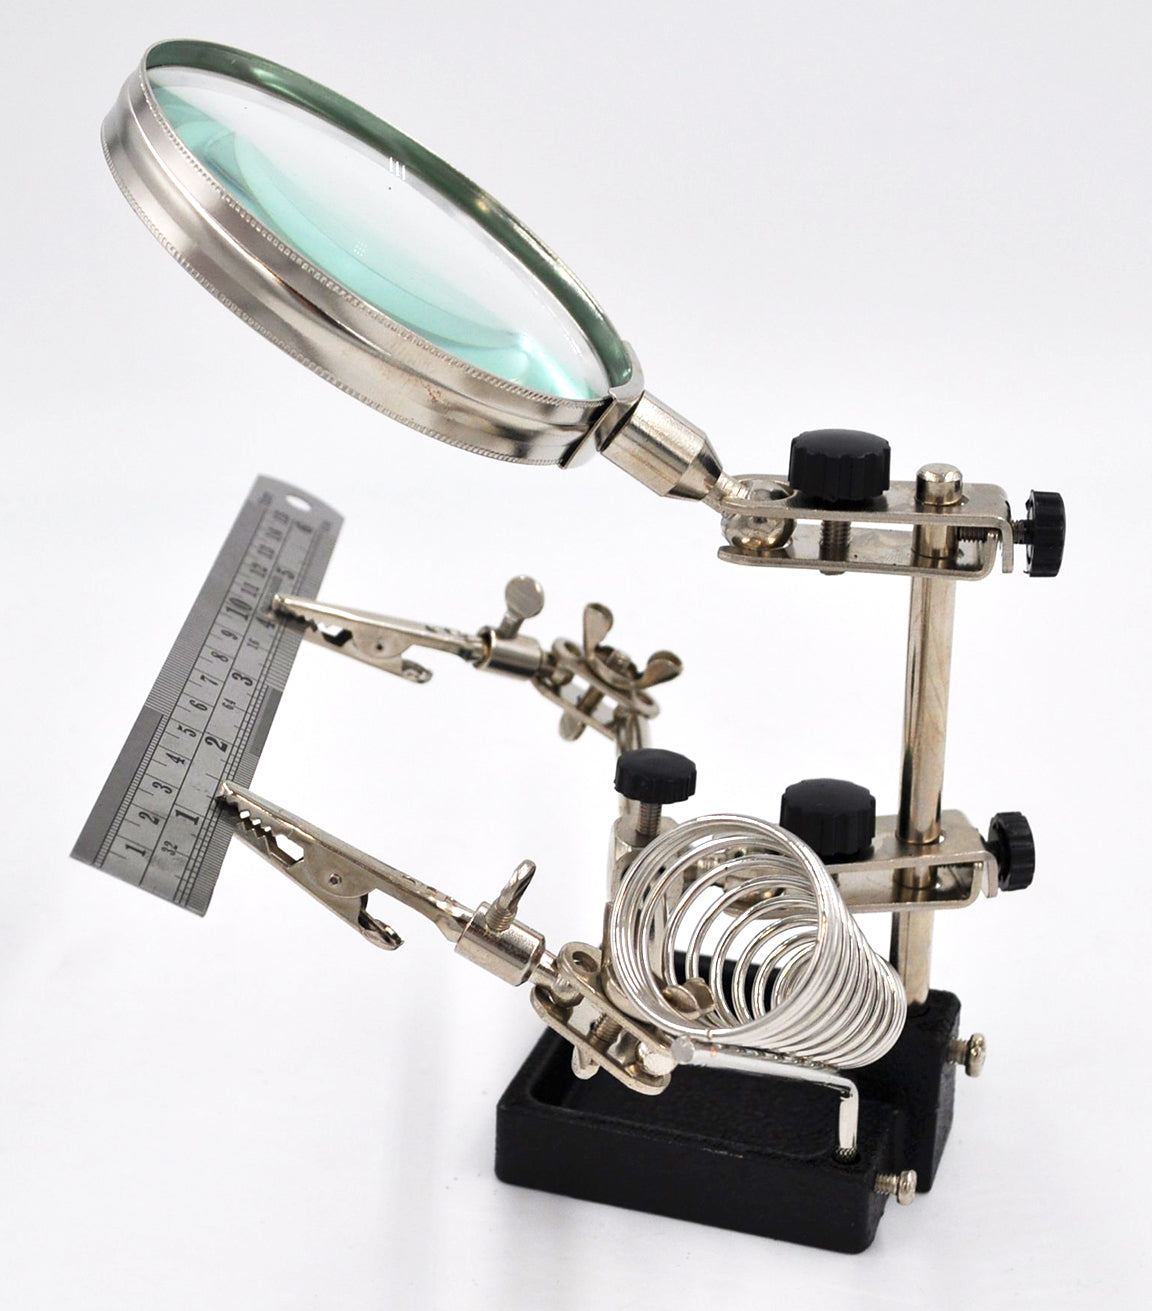 Hands Free Coil Stand Magnifying Glass